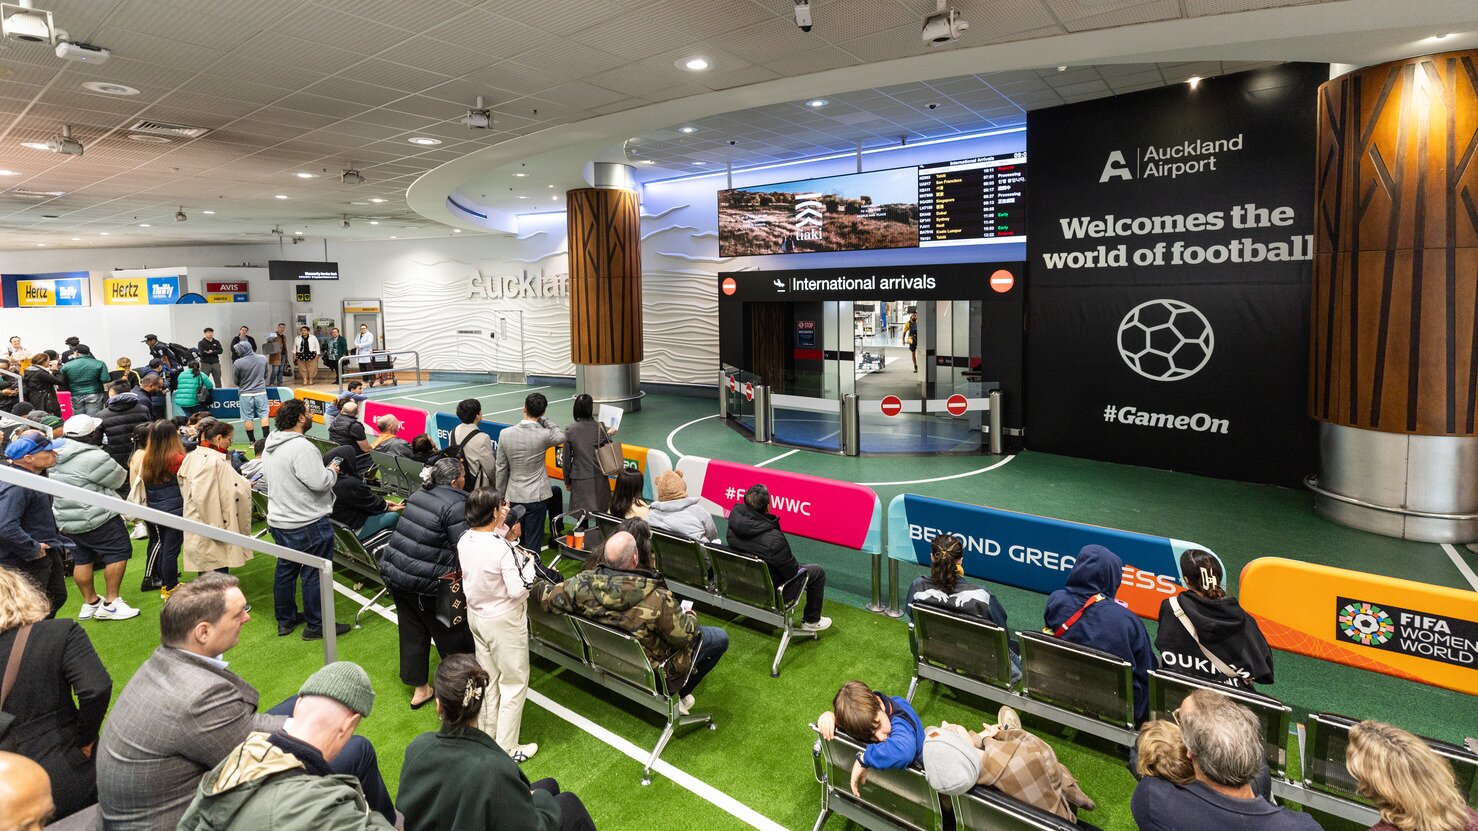 Auckland Airport, FIFA World Cup 